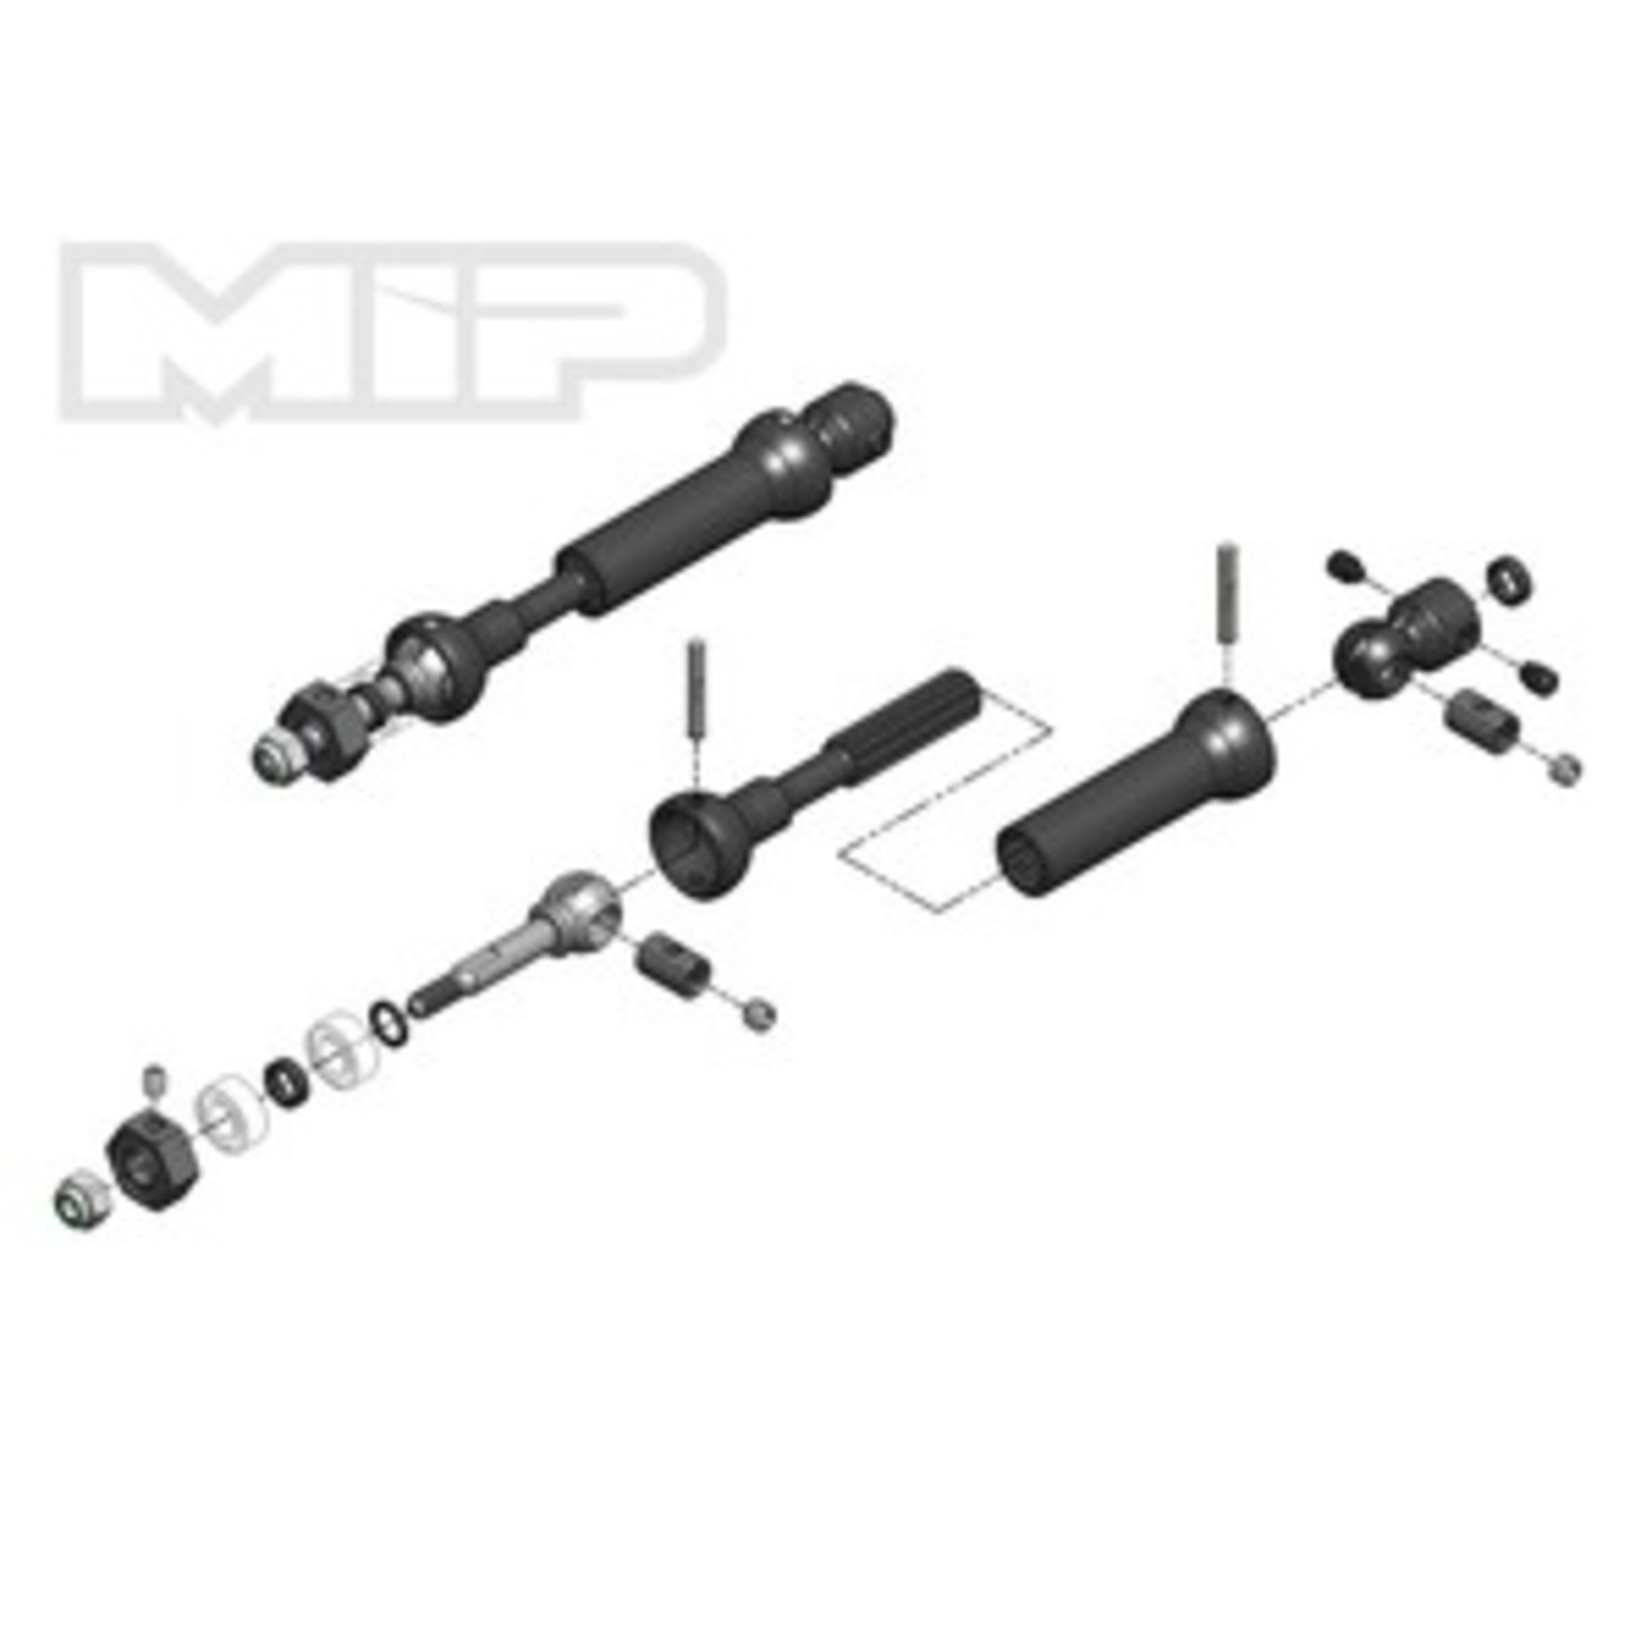 MIP - Moore's Ideal Products MIP X-Duty, CVD Drive Kit, Rear, 87mm to 112mm